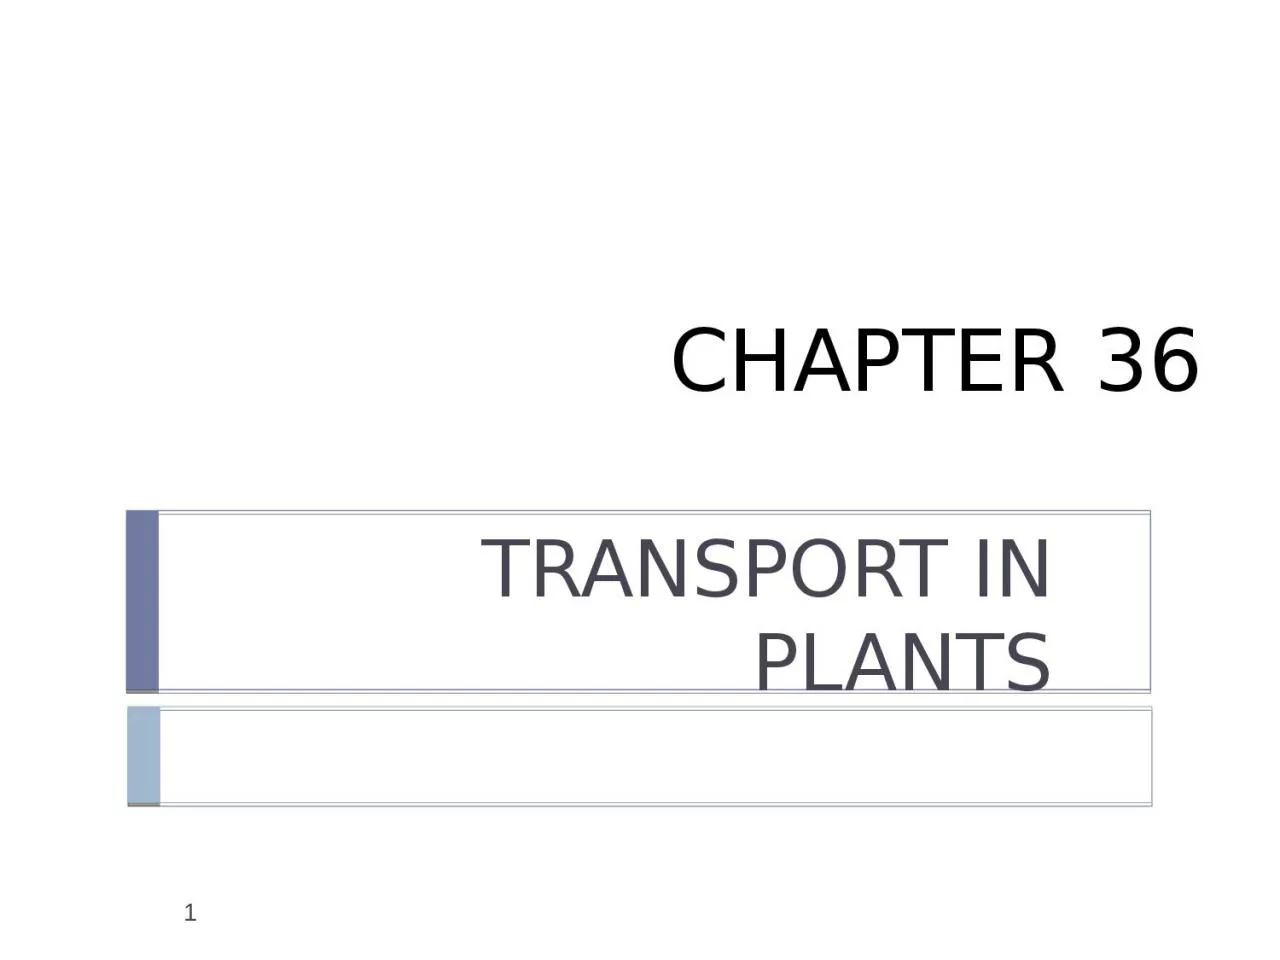 CHAPTER 36 TRANSPORT IN PLANTS